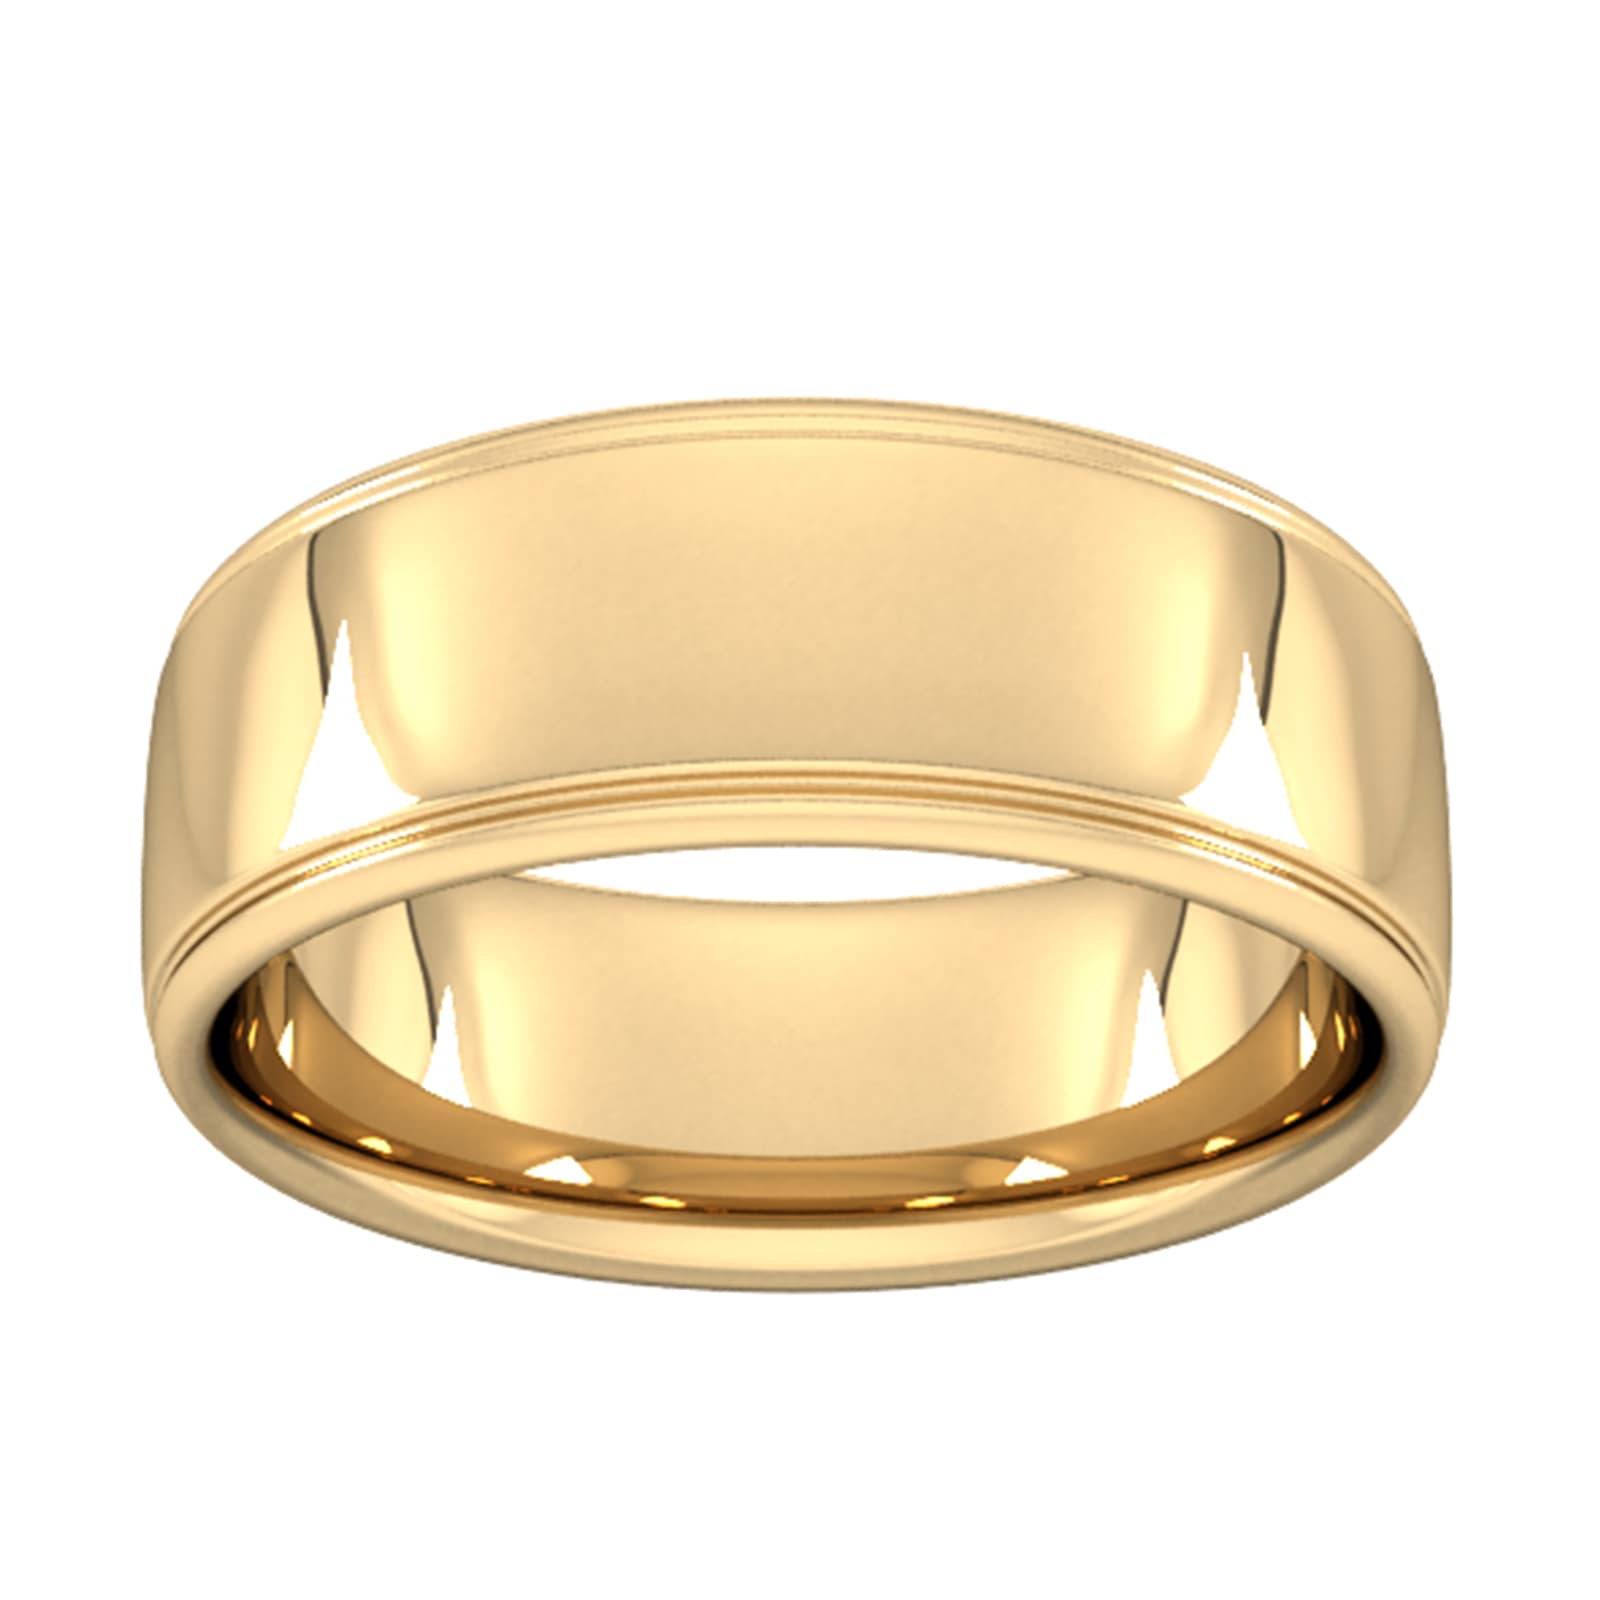 8mm Slight Court Standard Polished Finish With Grooves Wedding Ring In 18 Carat Yellow Gold - Ring Size L